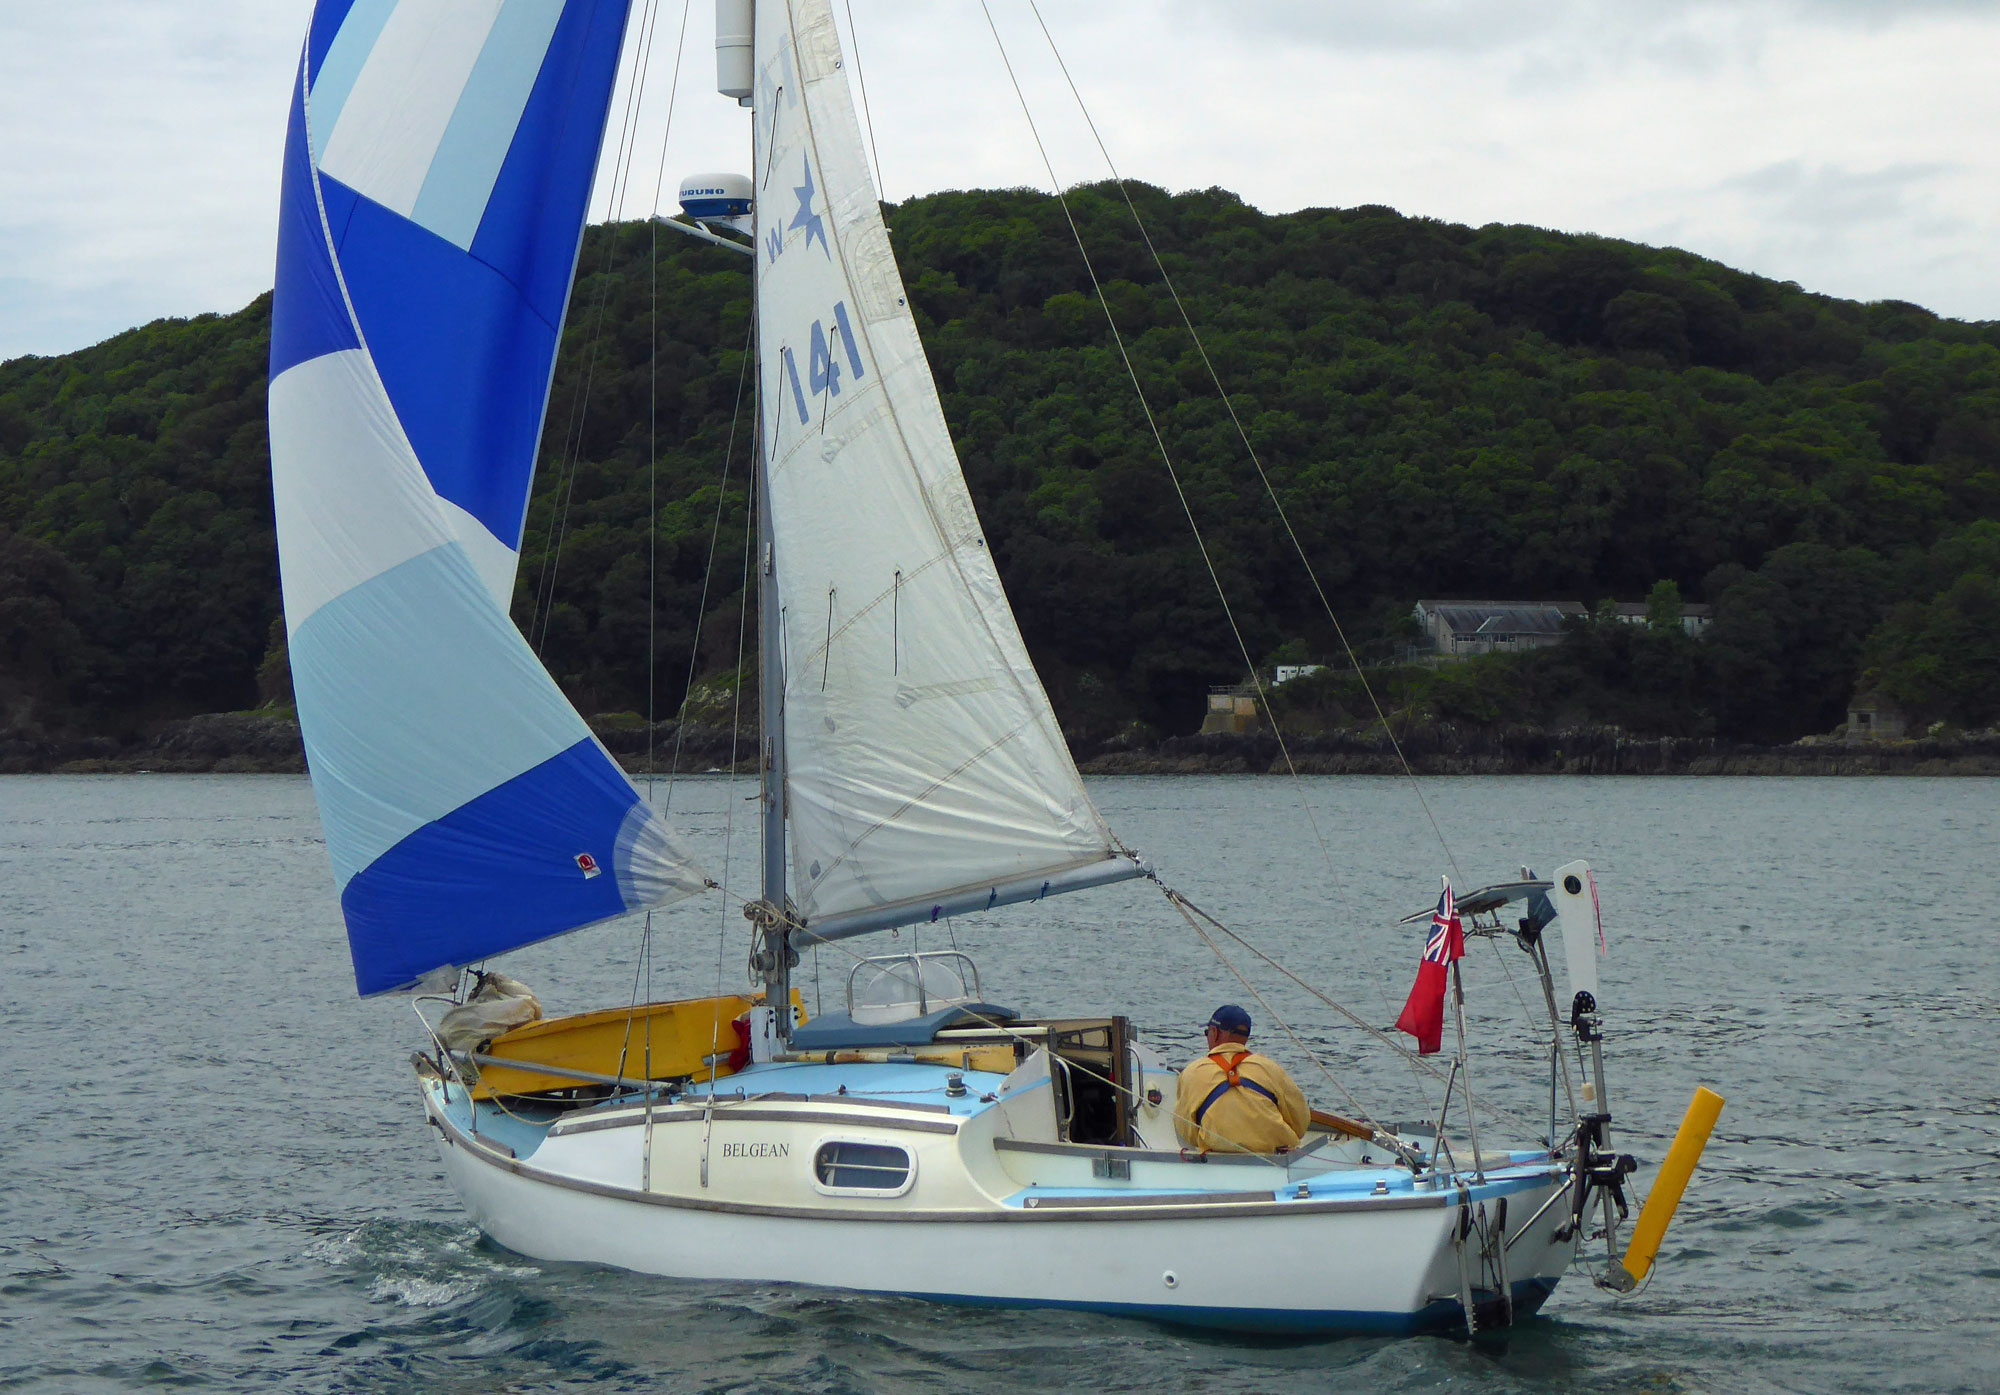 A Westerly 22 sailboat off Plymouth UK